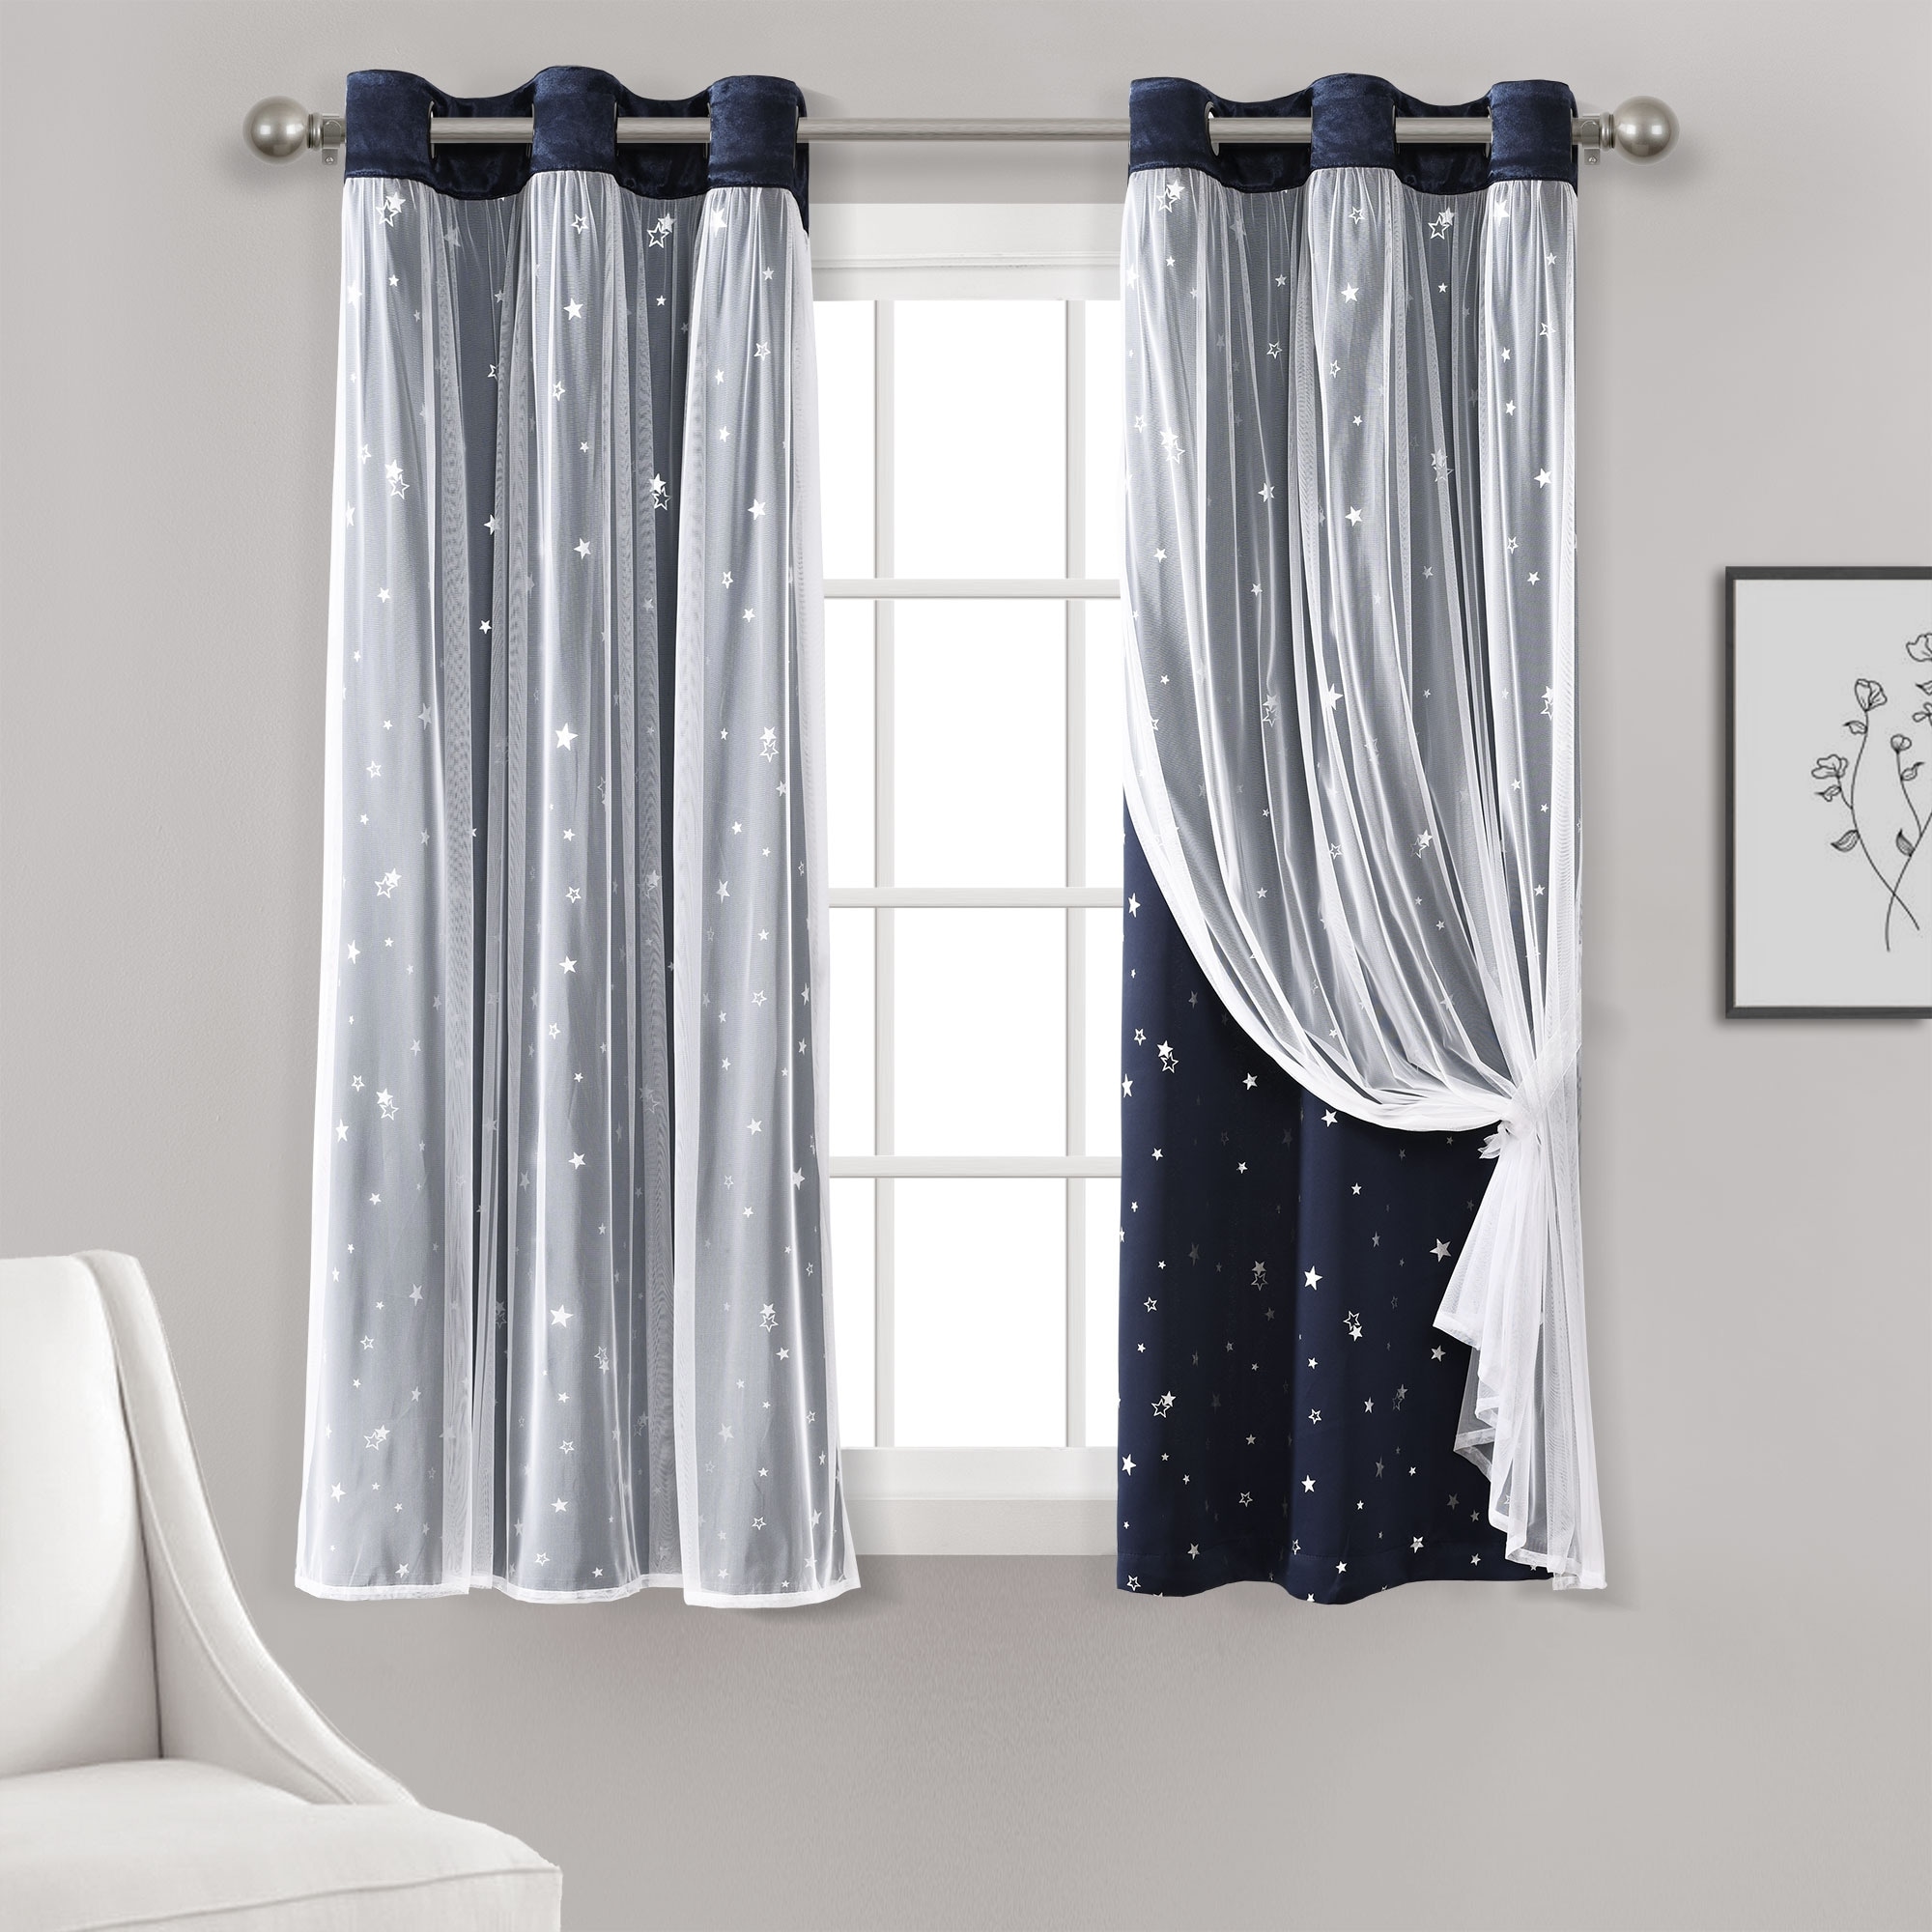 Lush Decor Star Sheer Insulated Grommet Blackout Window Curtain Panel Pair - 84 Inches - Neutral